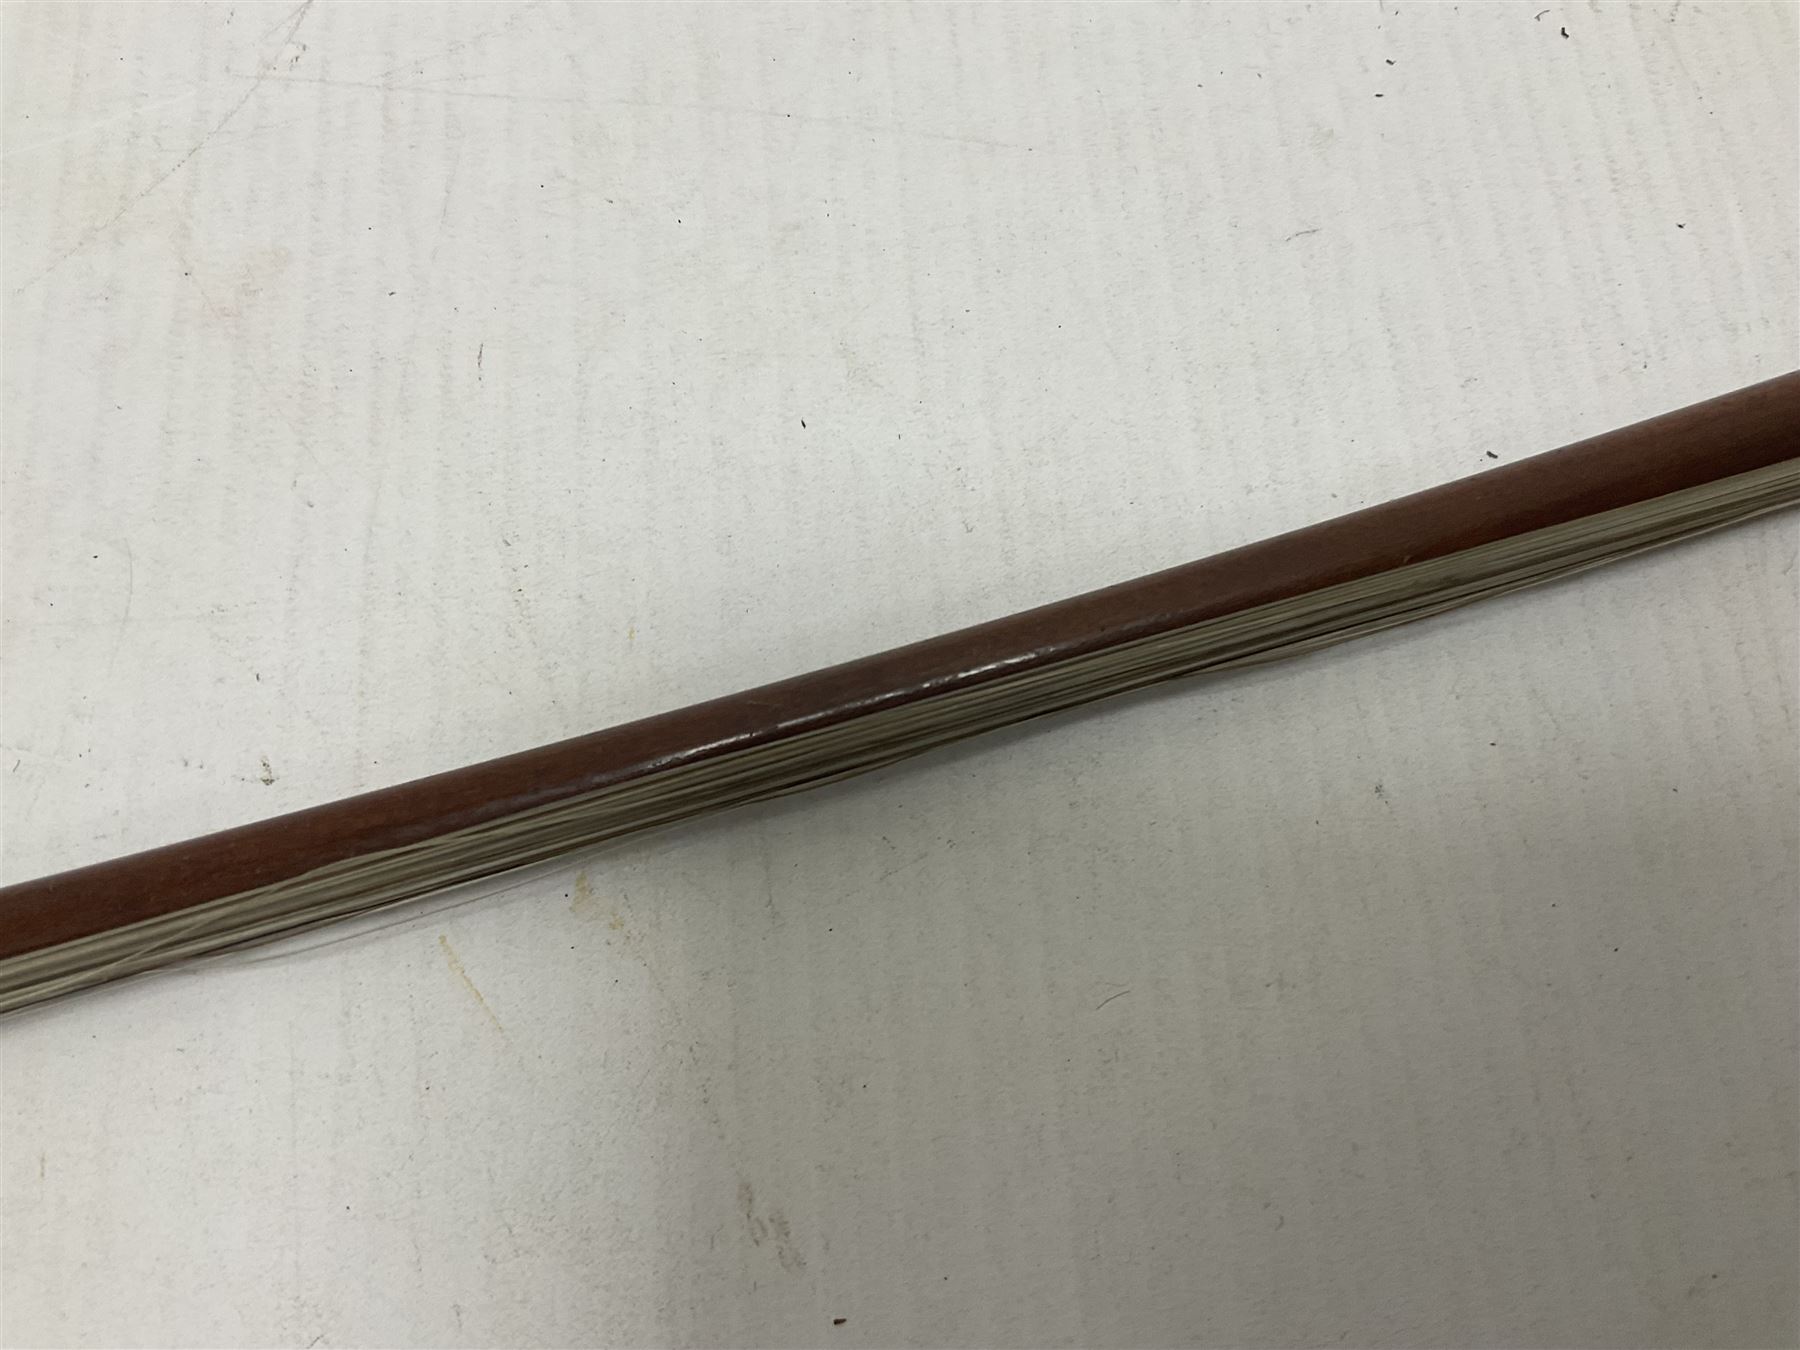 Cello bow possibly made from pernambuco or Brazilwood - Image 7 of 10